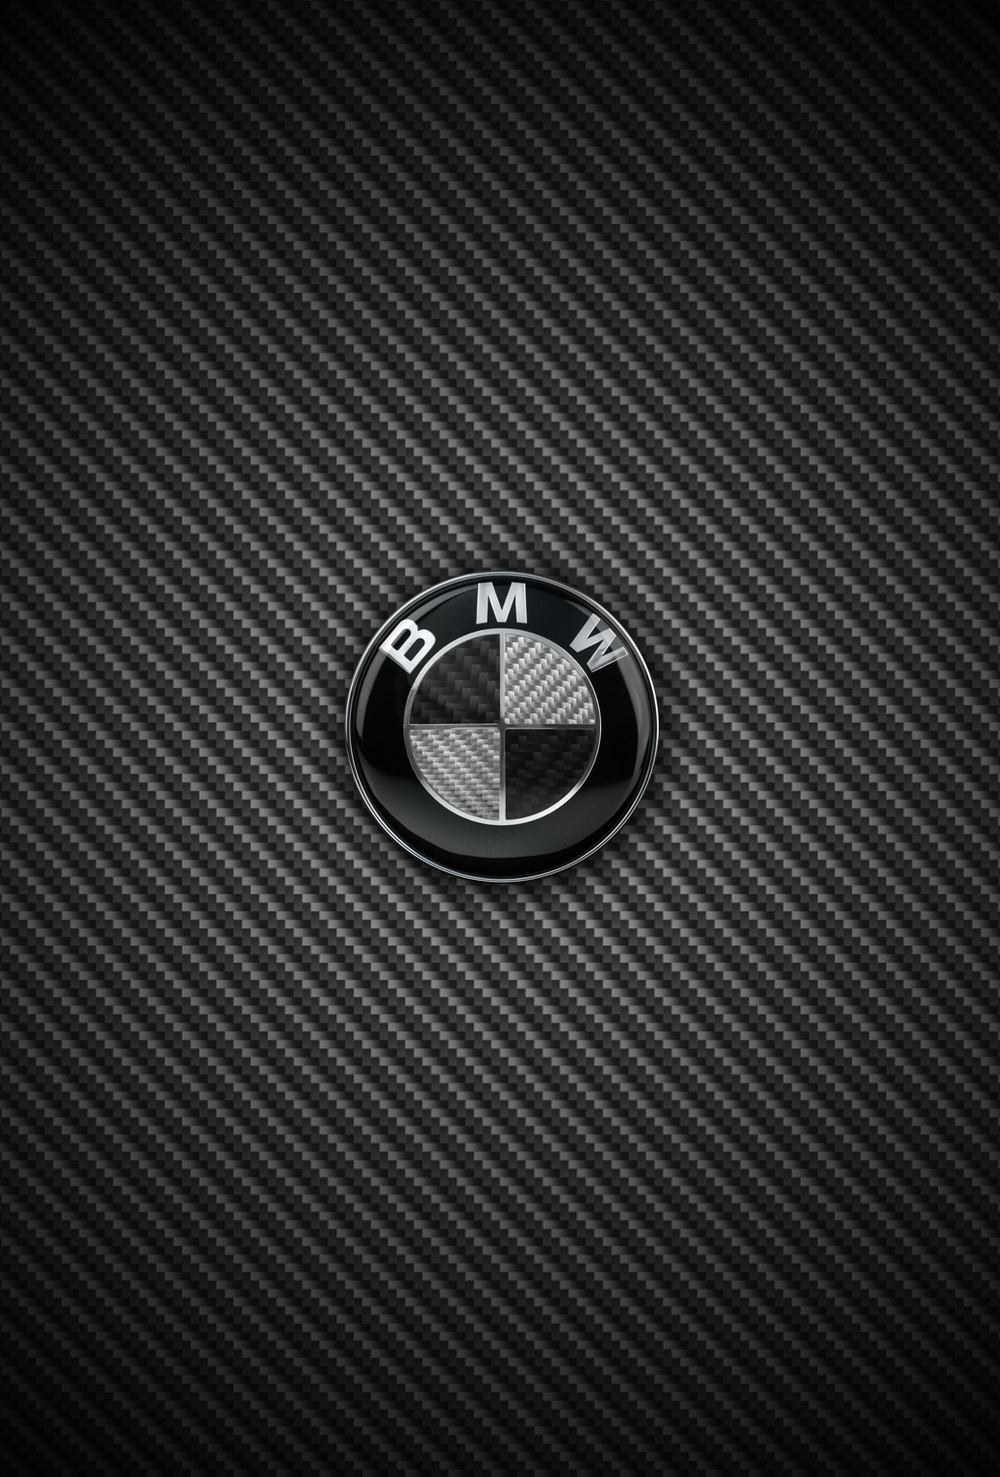 Or iPhone And Bmw Auto Wallpaper